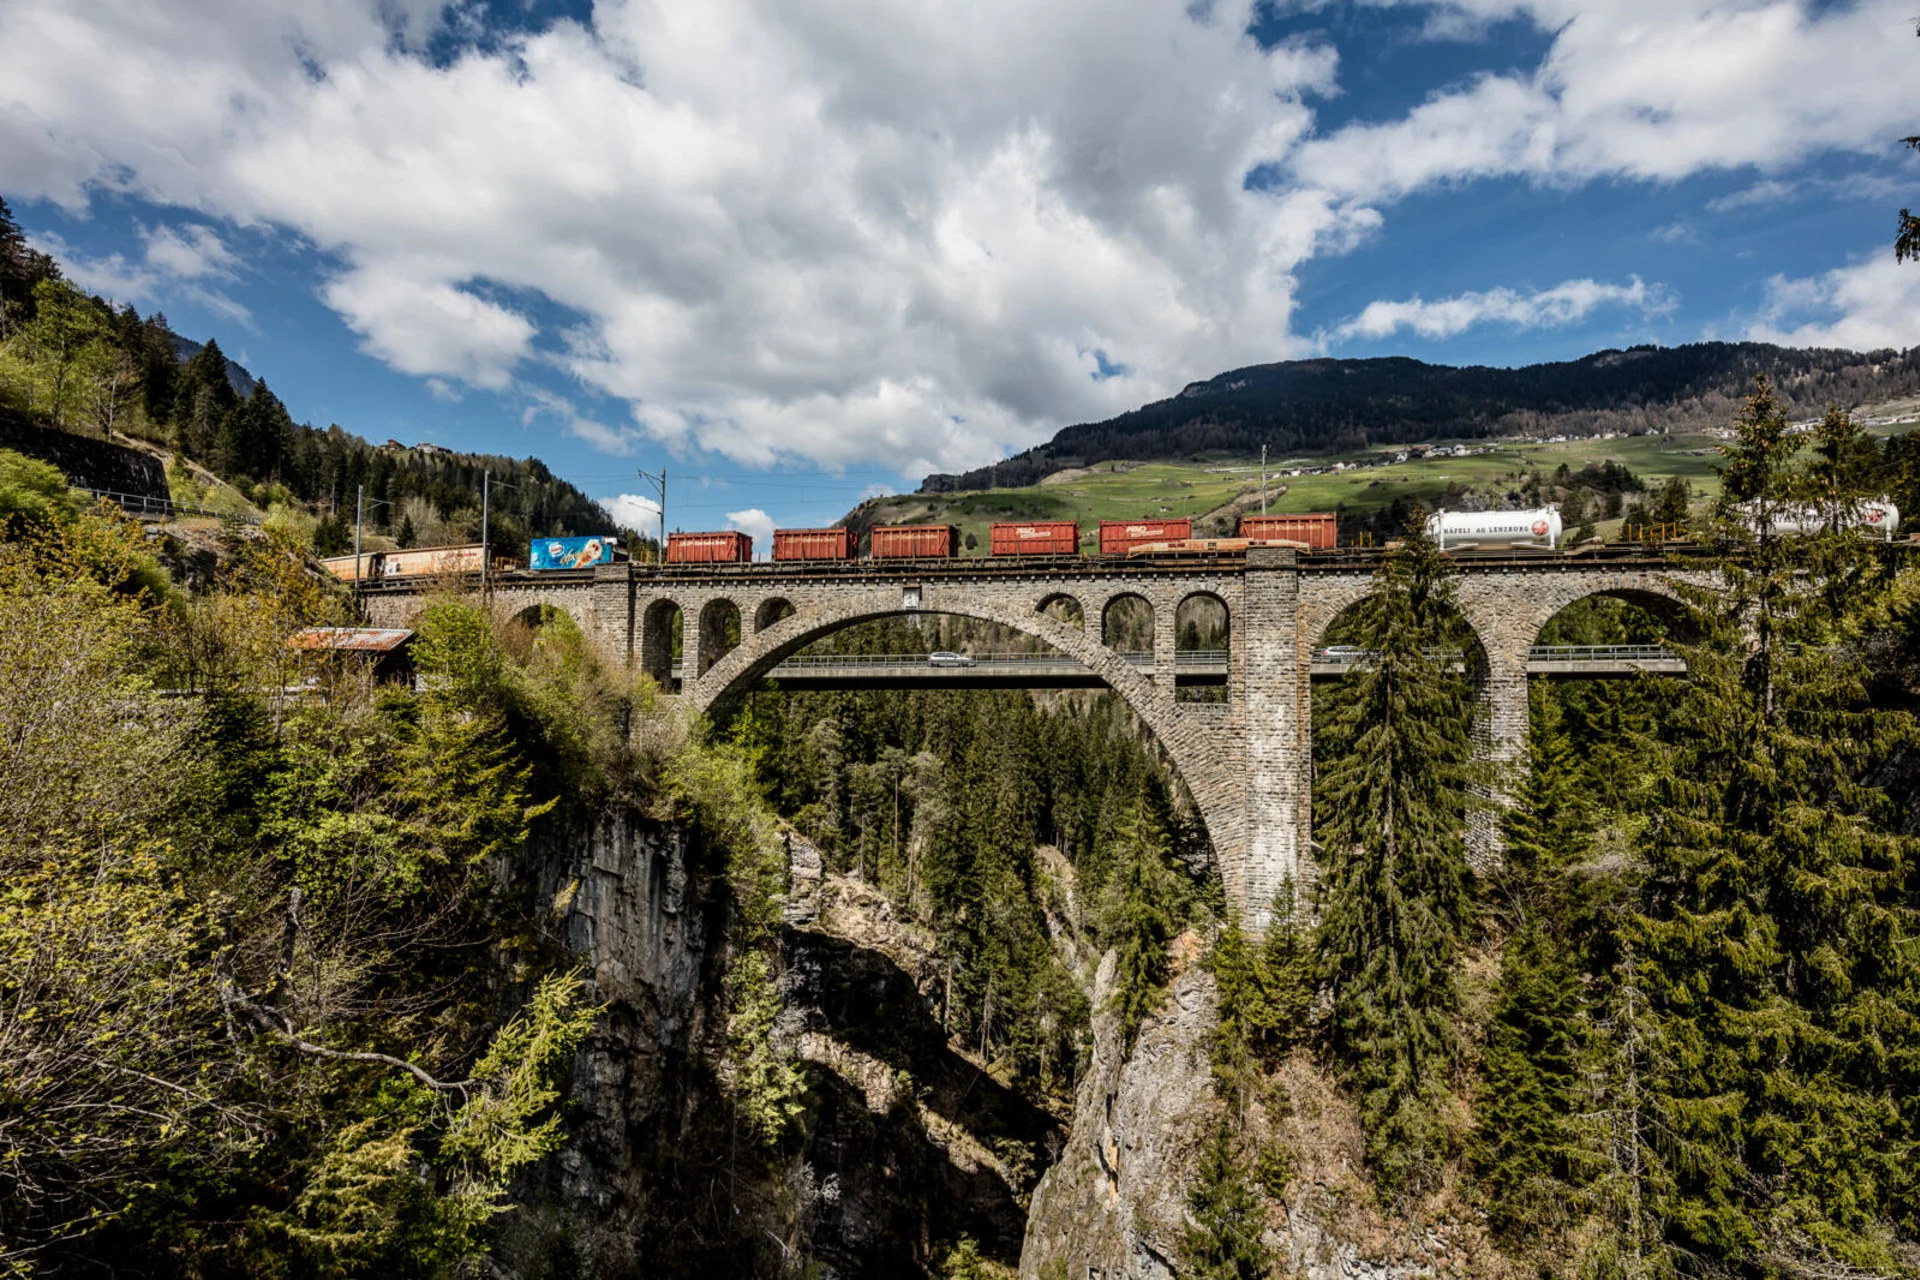 The Rhaetian Railway travels over a viaduct in an idyllic setting